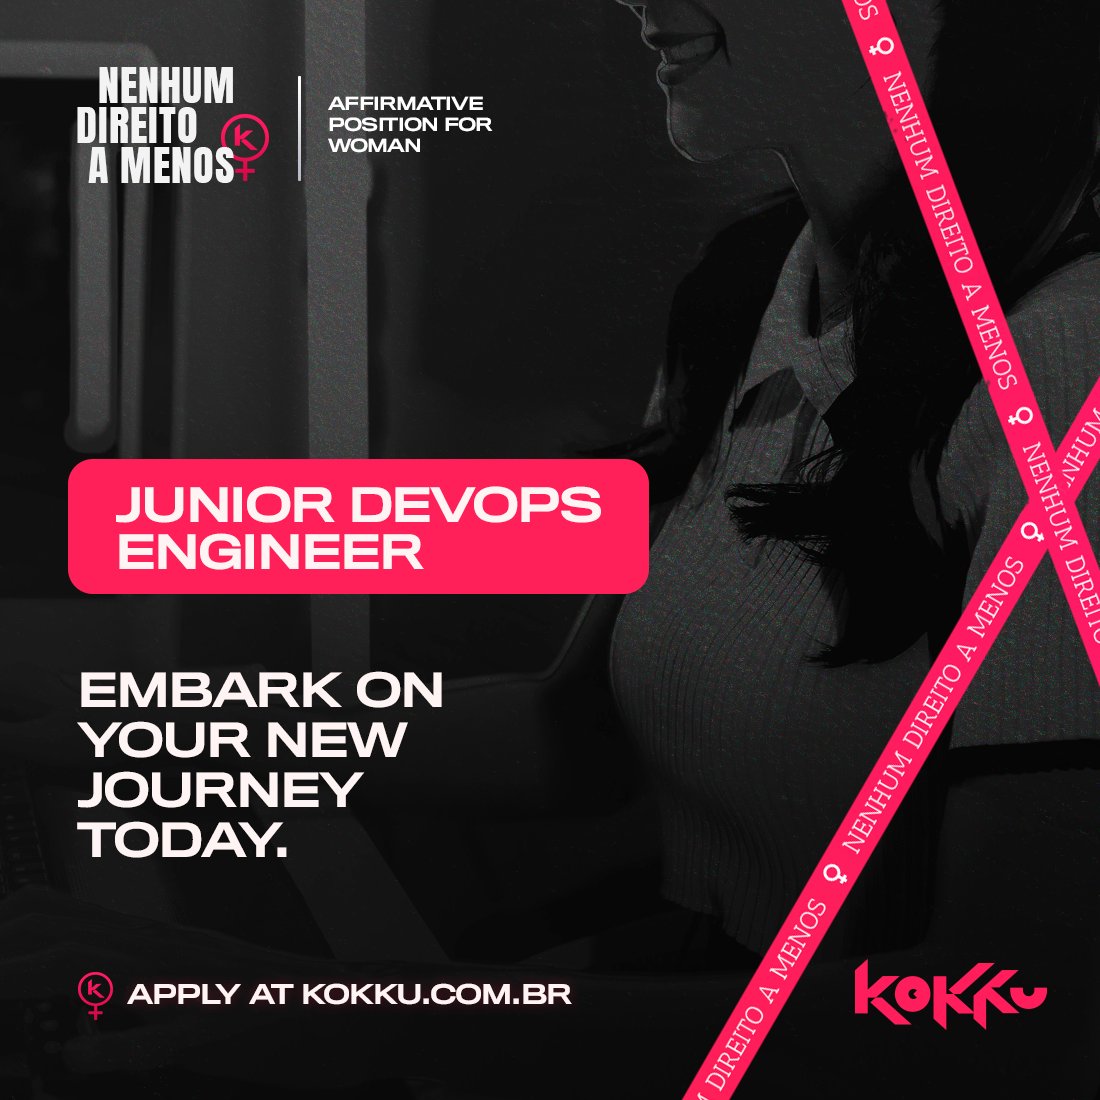 If developing and maintaining infrastructure and automation processes is where your talent lies, your opportunity has arrived: consider our Junior DevOps Engineer position at Kokku. 📌 This is an affirmative position, open exclusively to women. Details: bit.ly/4cpZ0ii